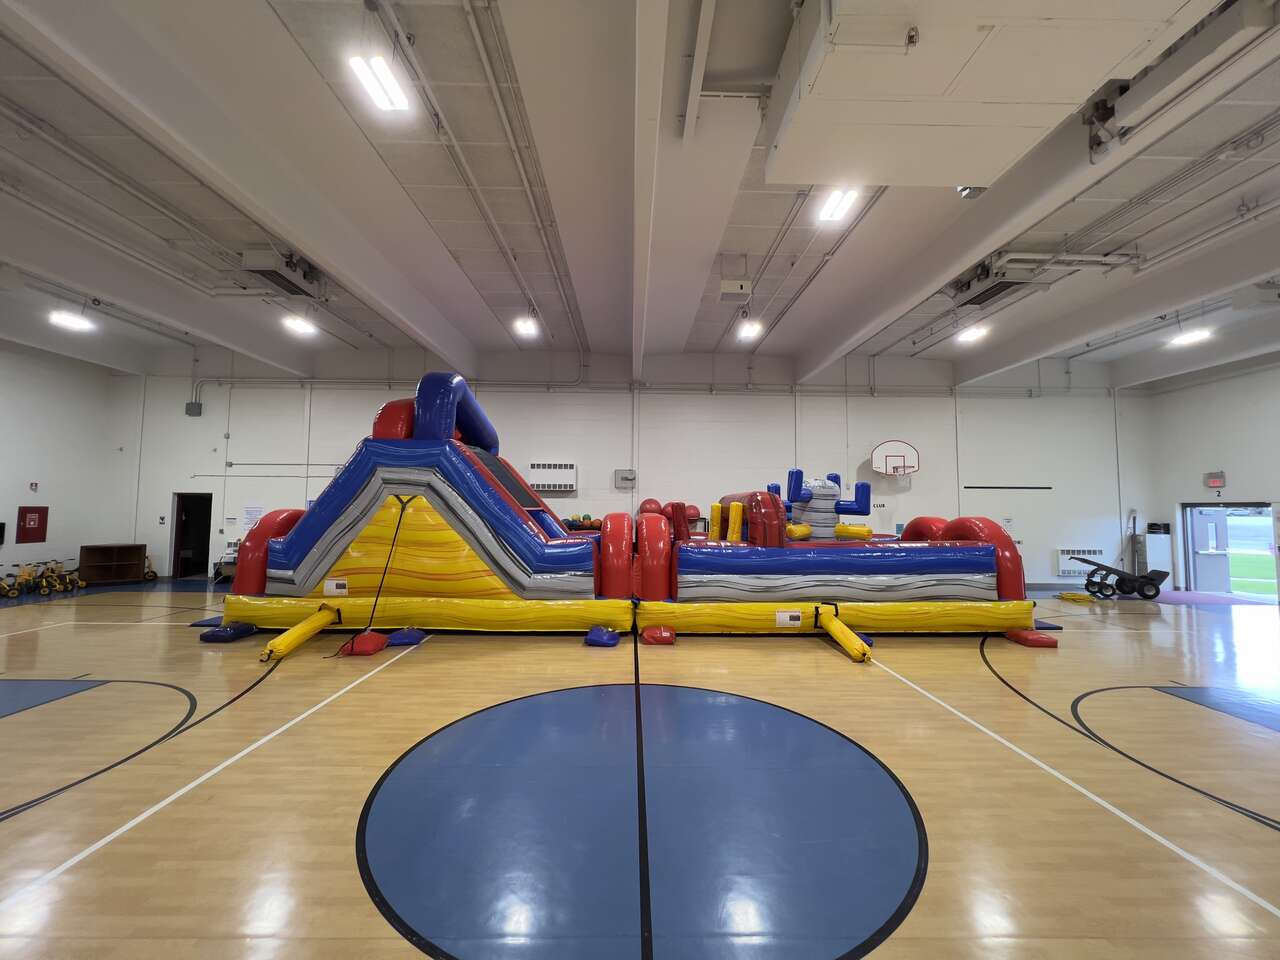 obstacles courses rental, from Fun Bounces Rental in Ottawa IL 61350